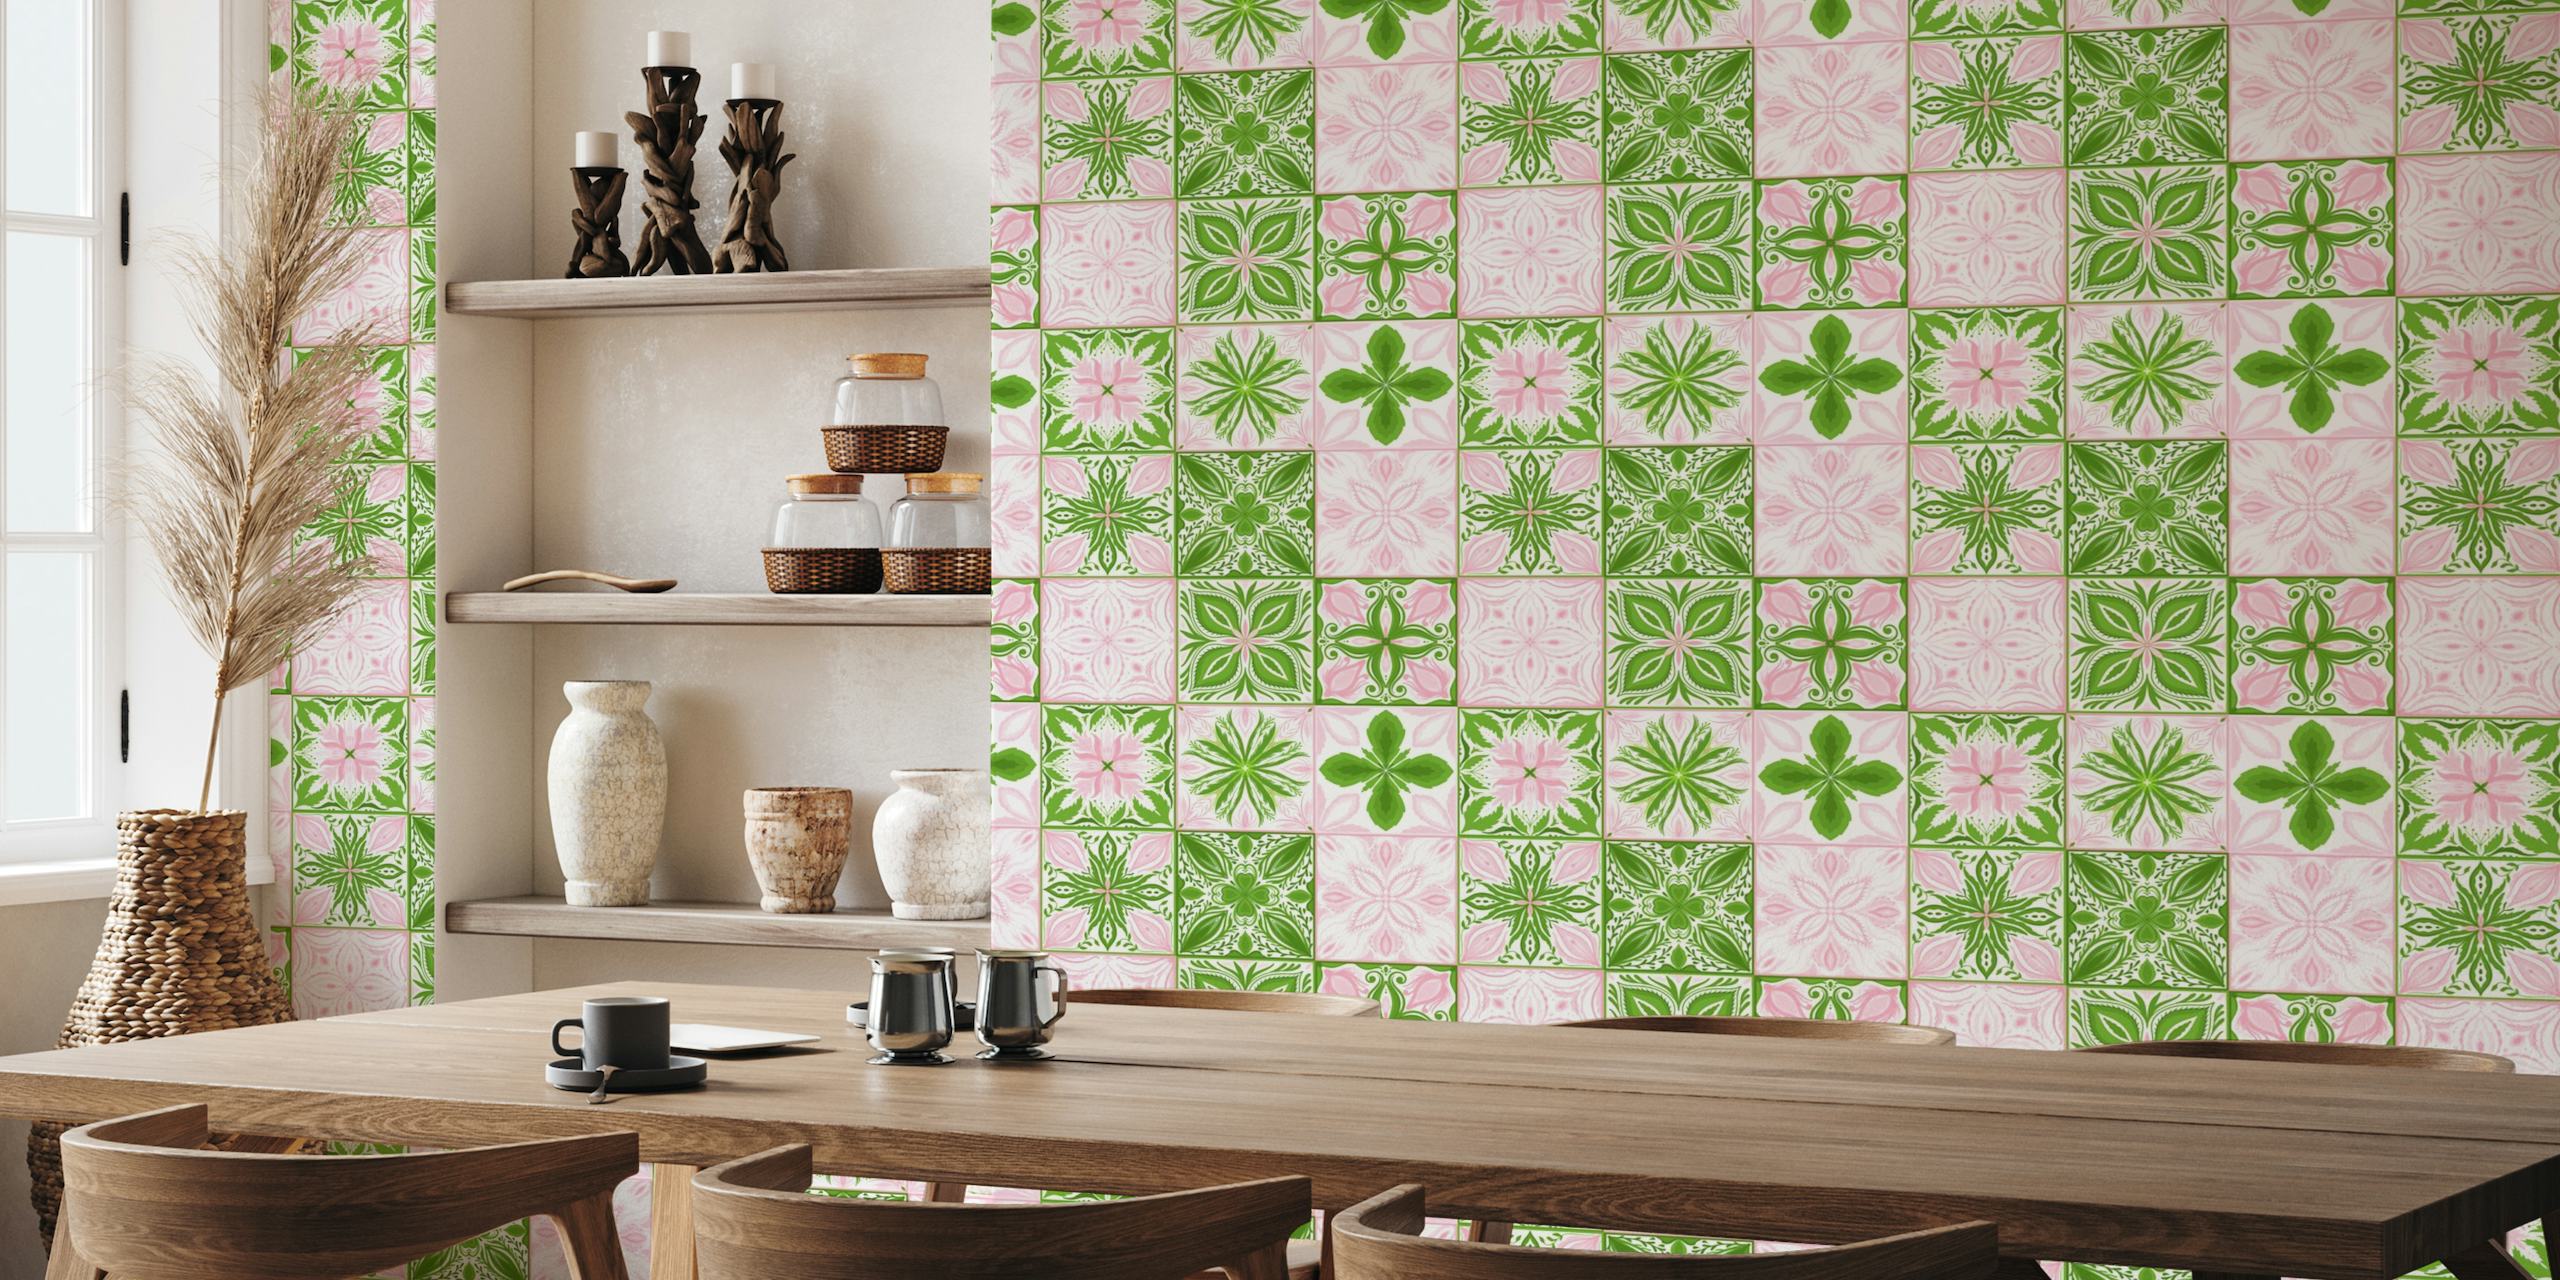 Ornate tiles in pink and green papel pintado